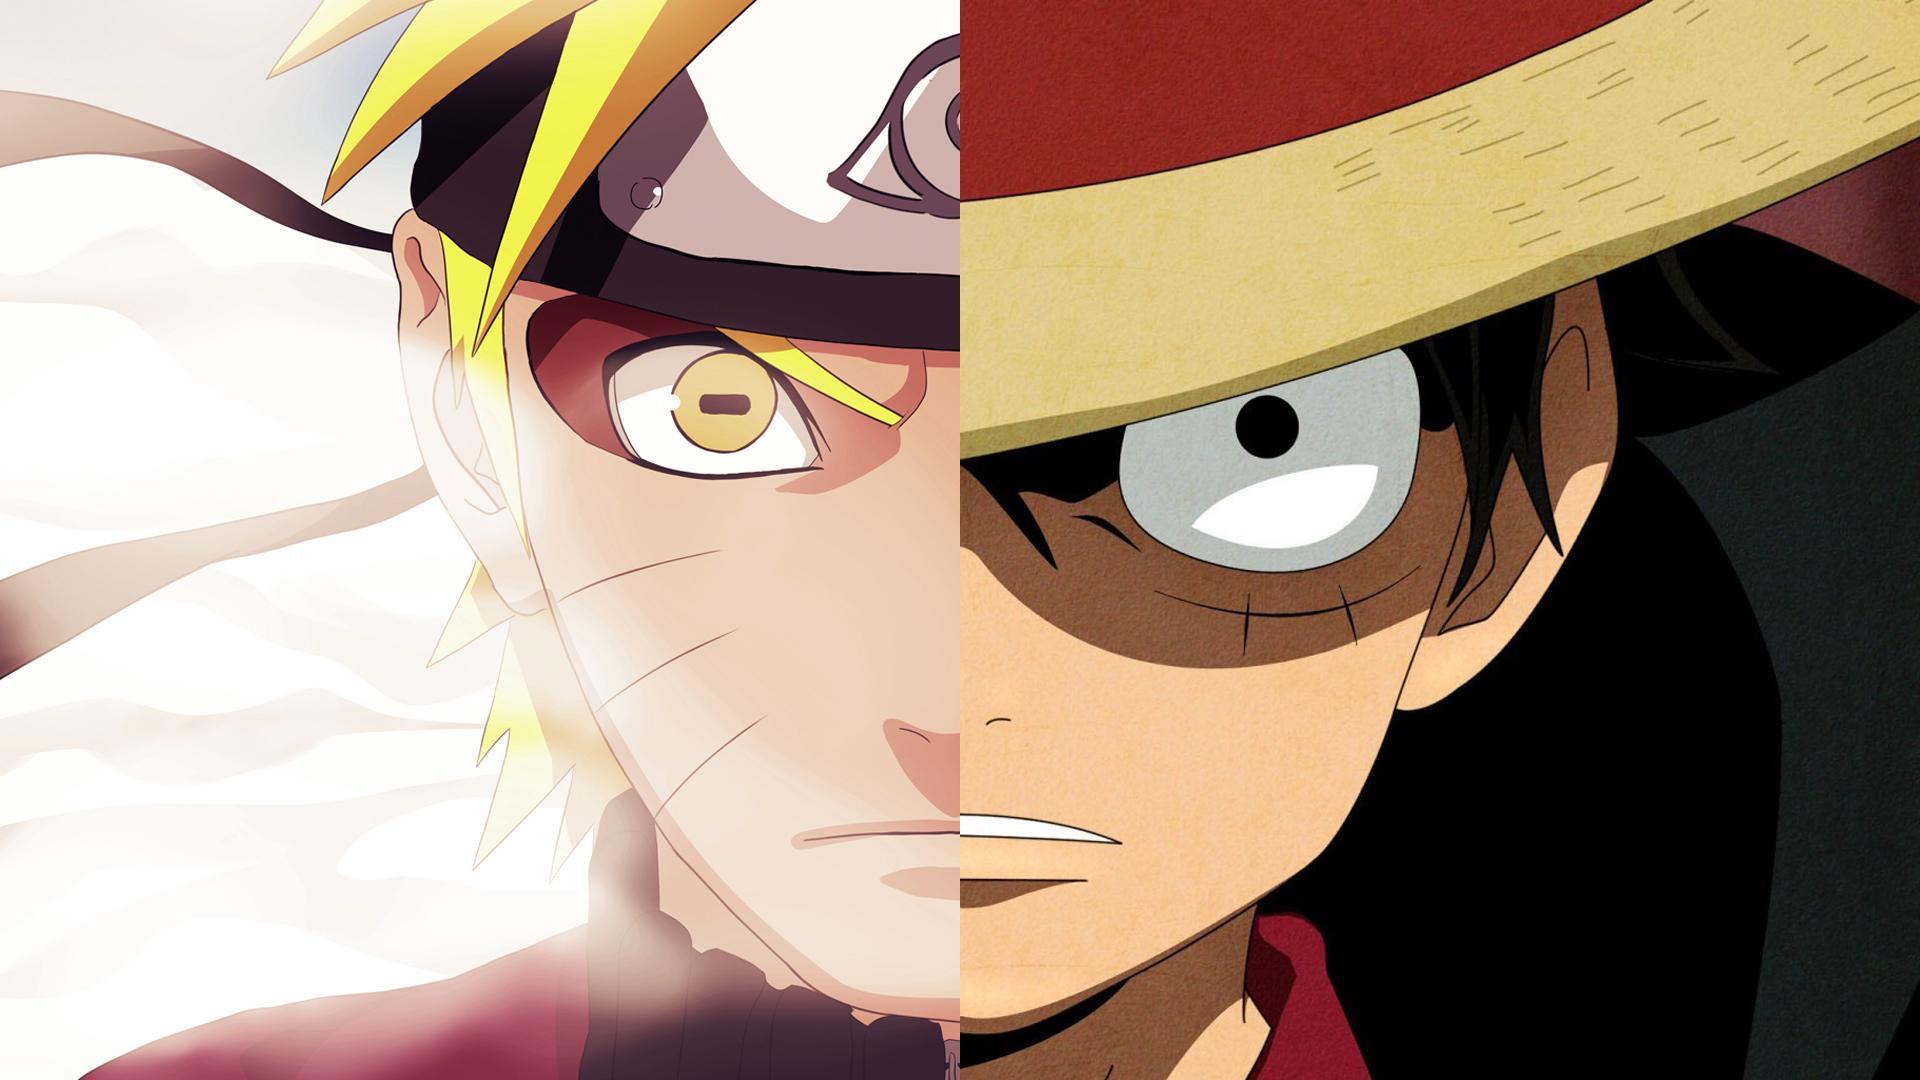 Naruto And Luffy Wallpaper Free Naruto And Luffy Background